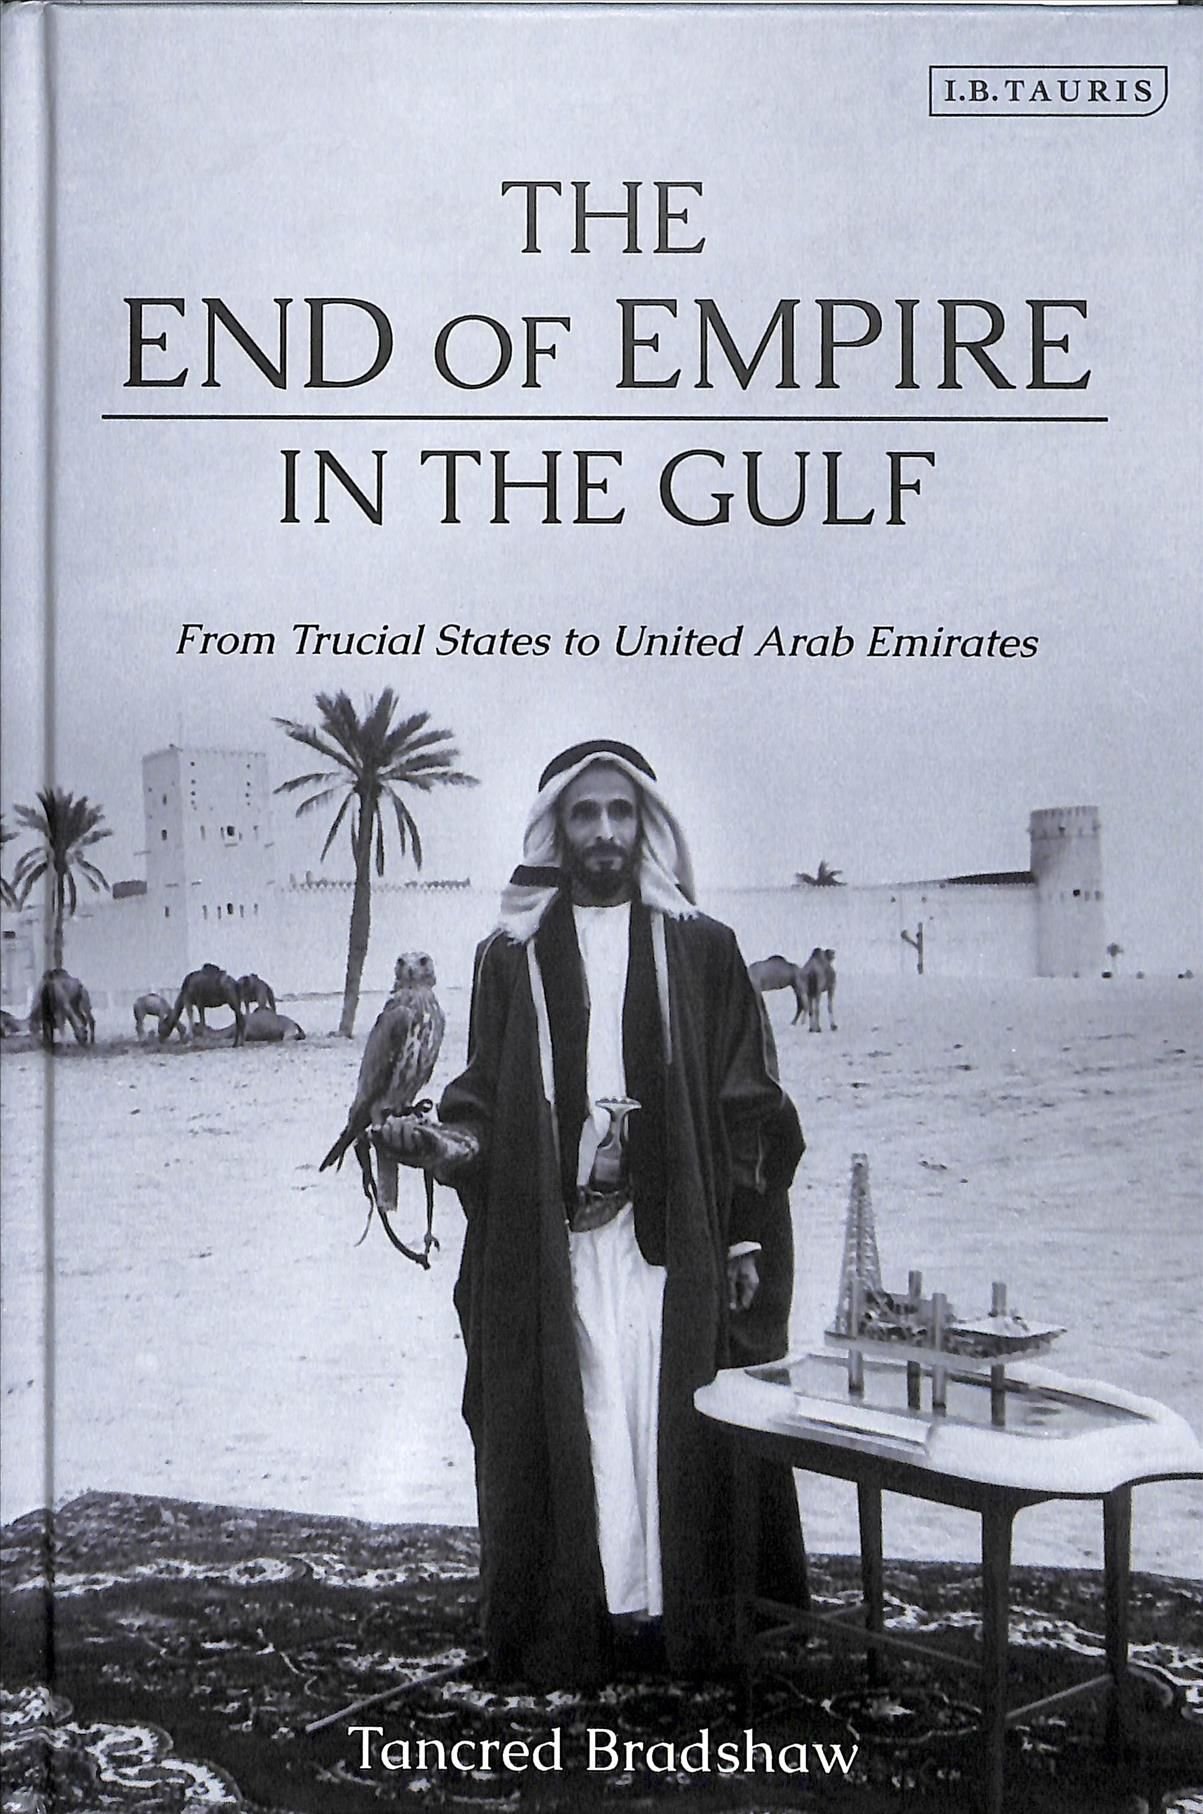 The End of Empire in the Gulf